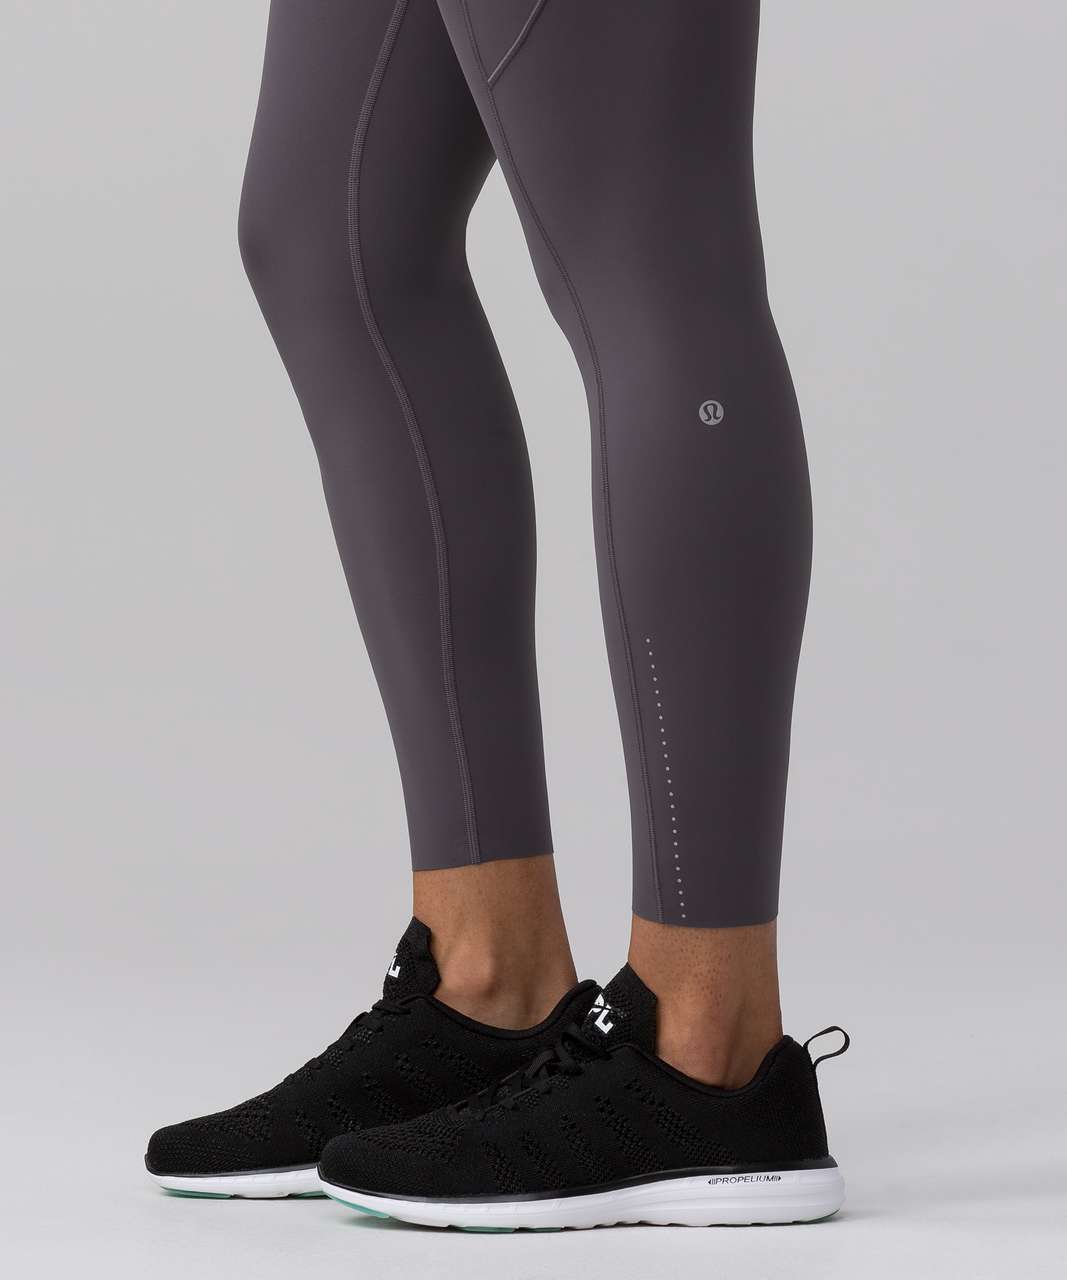 Lululemon Fast & Free 7/8 Tight II *Nulux 25" - Dark Carbon (First Release)